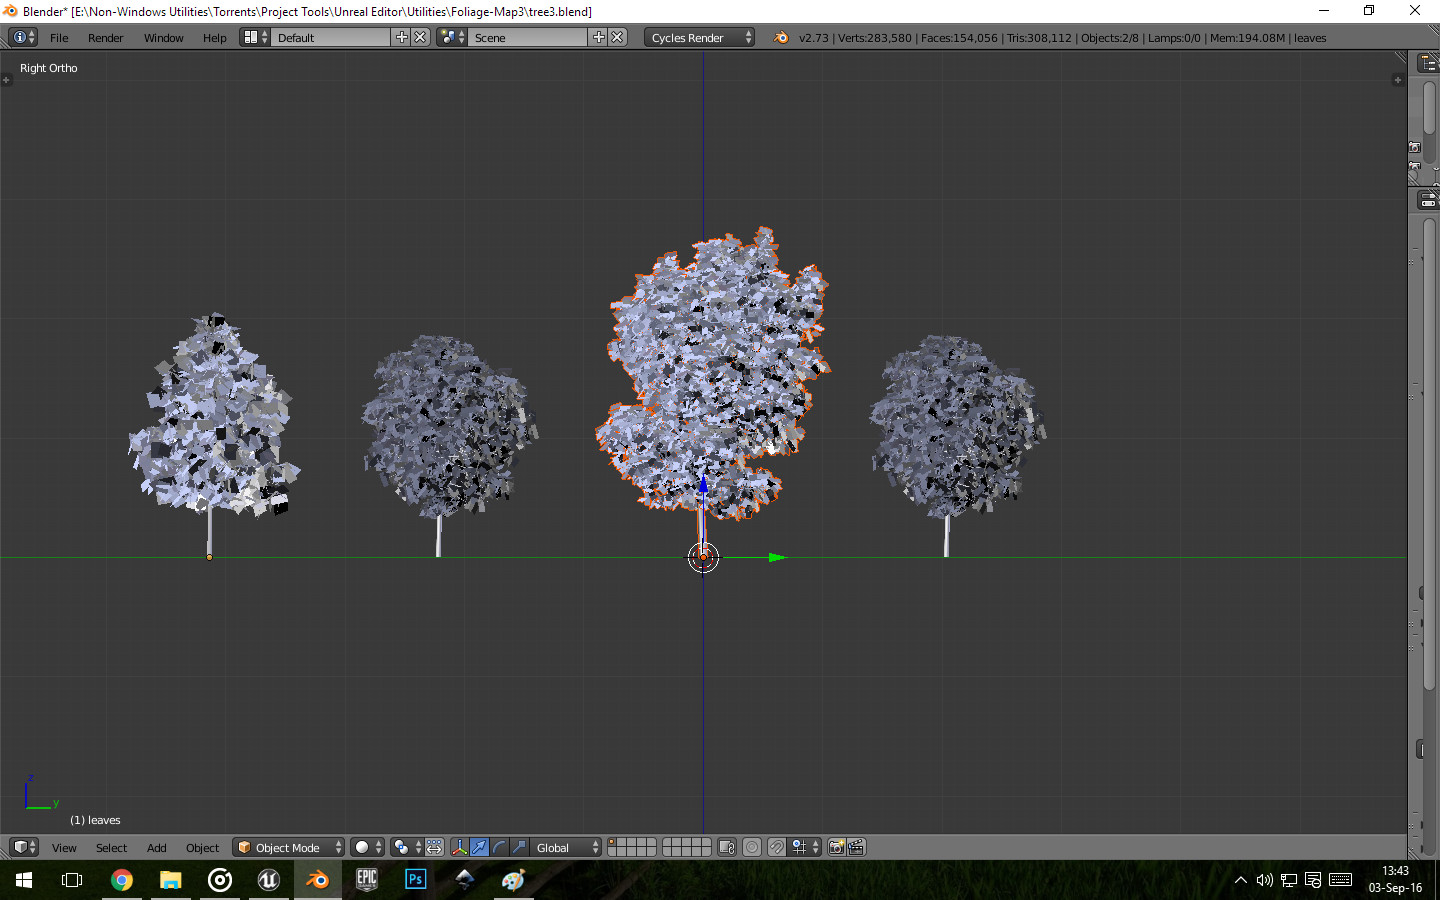 Final Tree Models used in Other Images